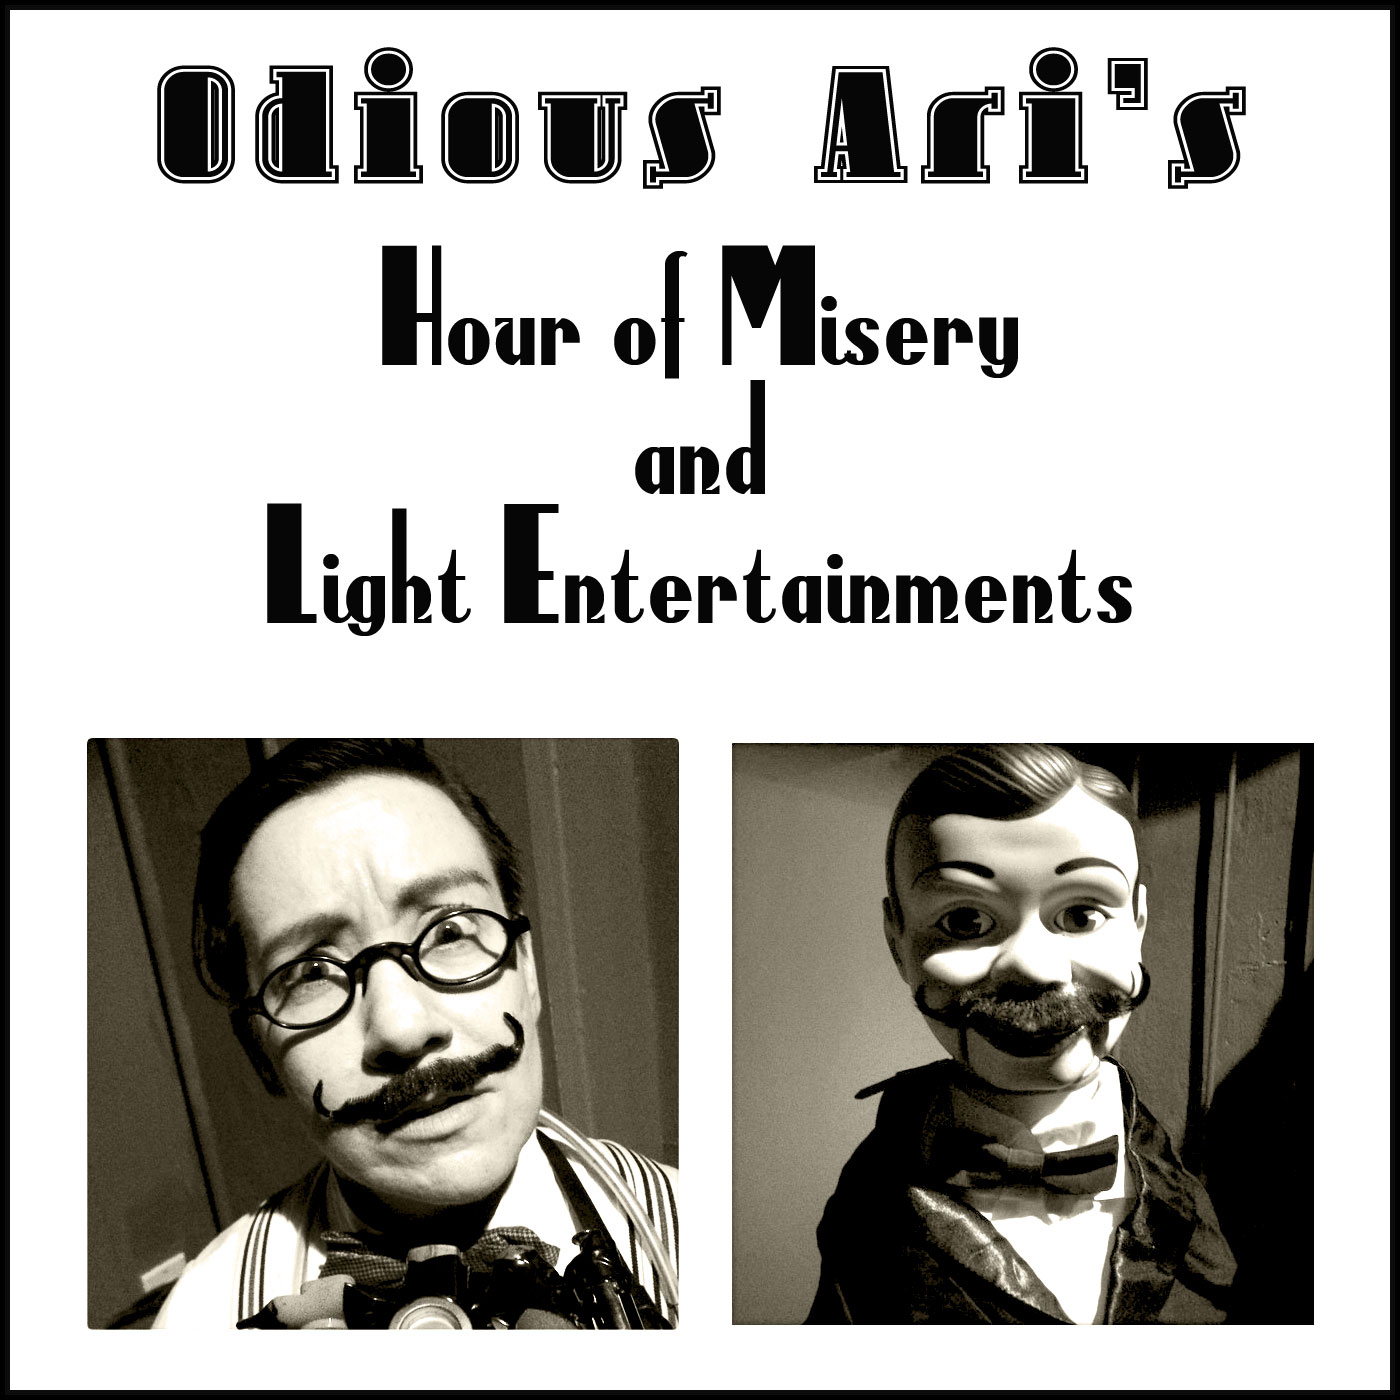 Odious Ari's Hour of Misery and Light Entertainments